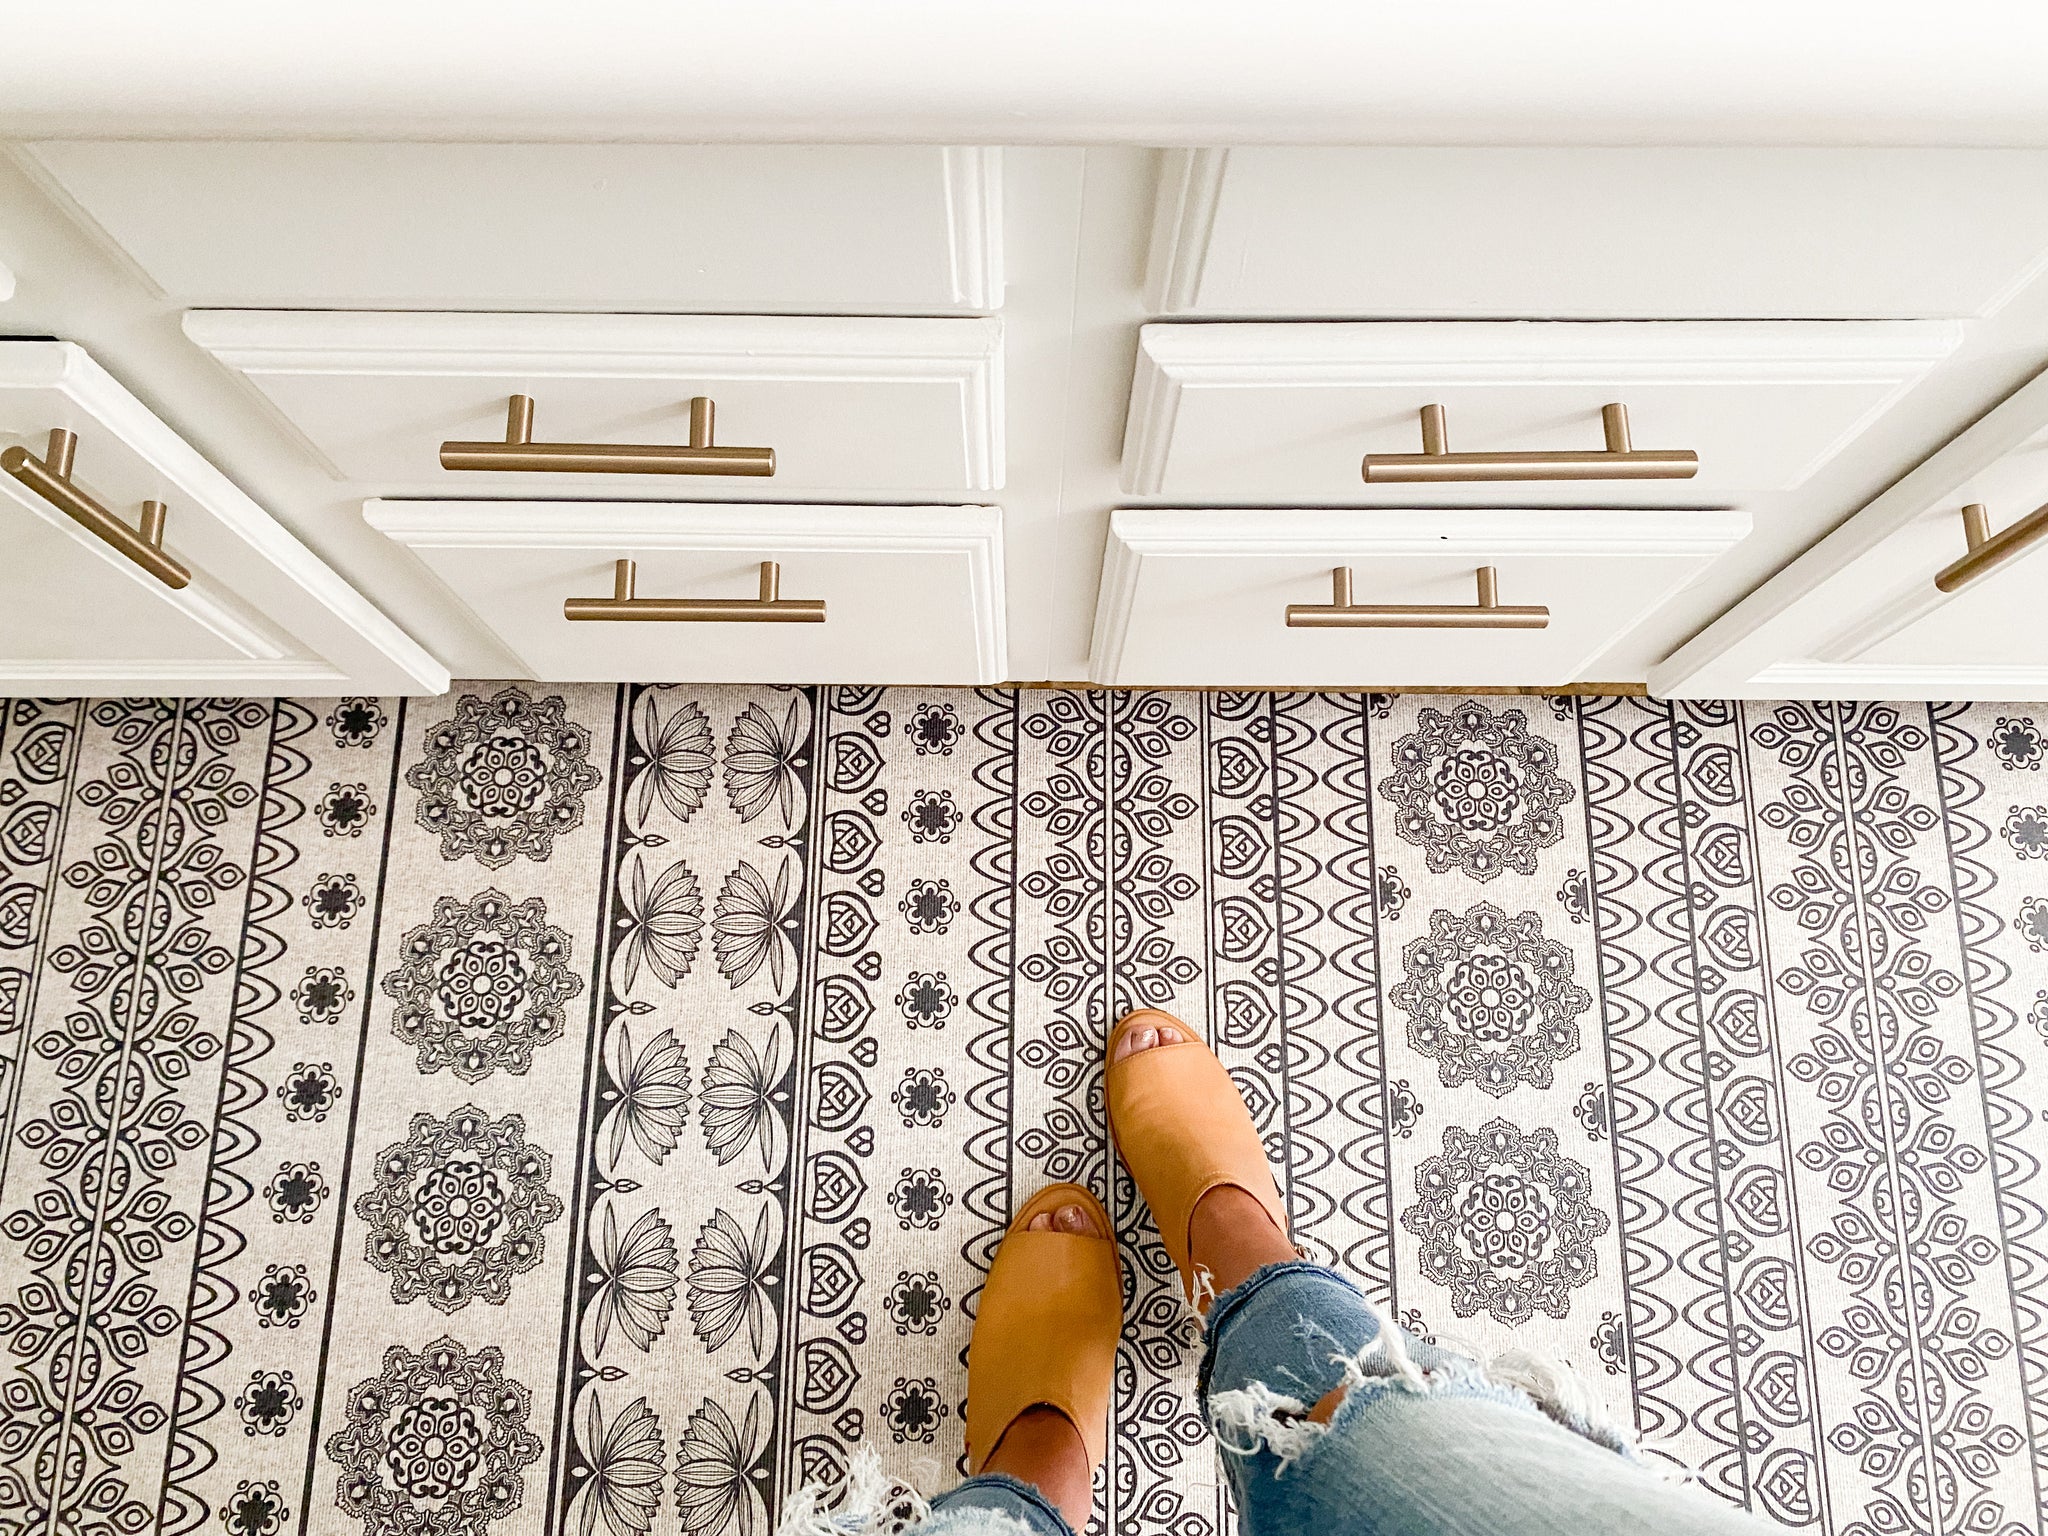 Elevate Your Space with Beautiful & Easy-to-Clean Floor Mats – VMAT